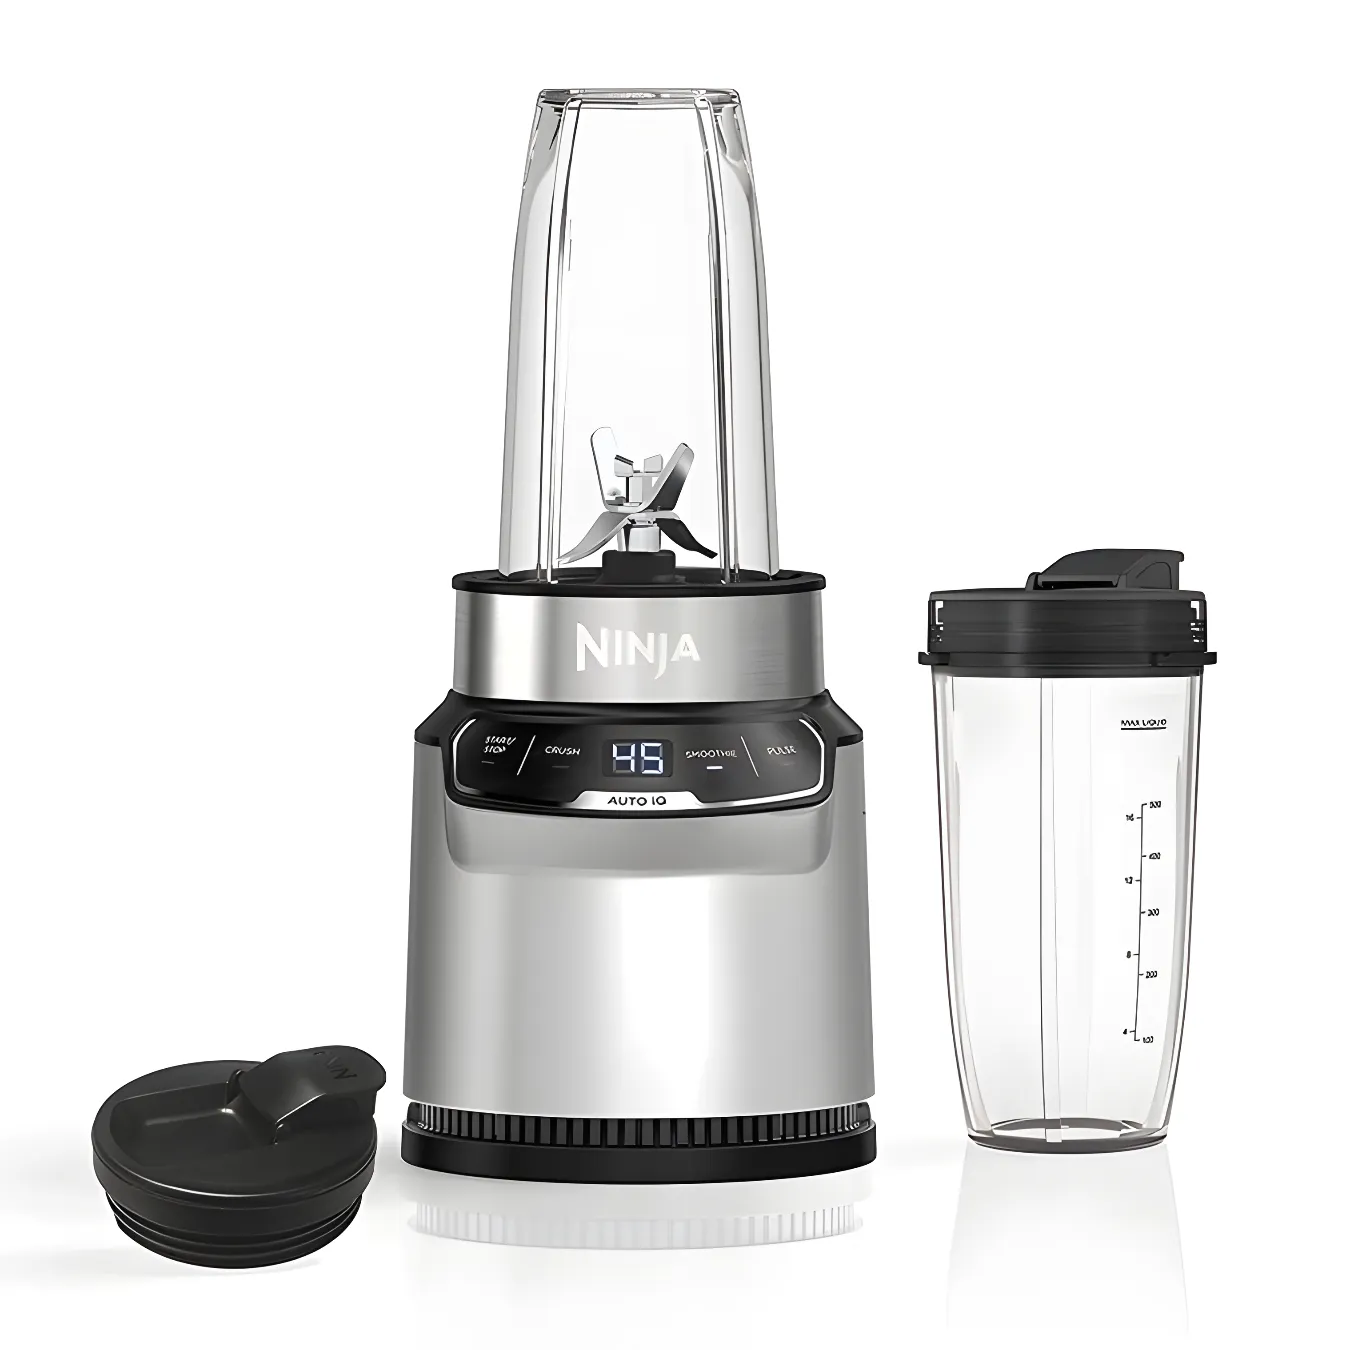 Free Ninja Blender In Exchange For A Review